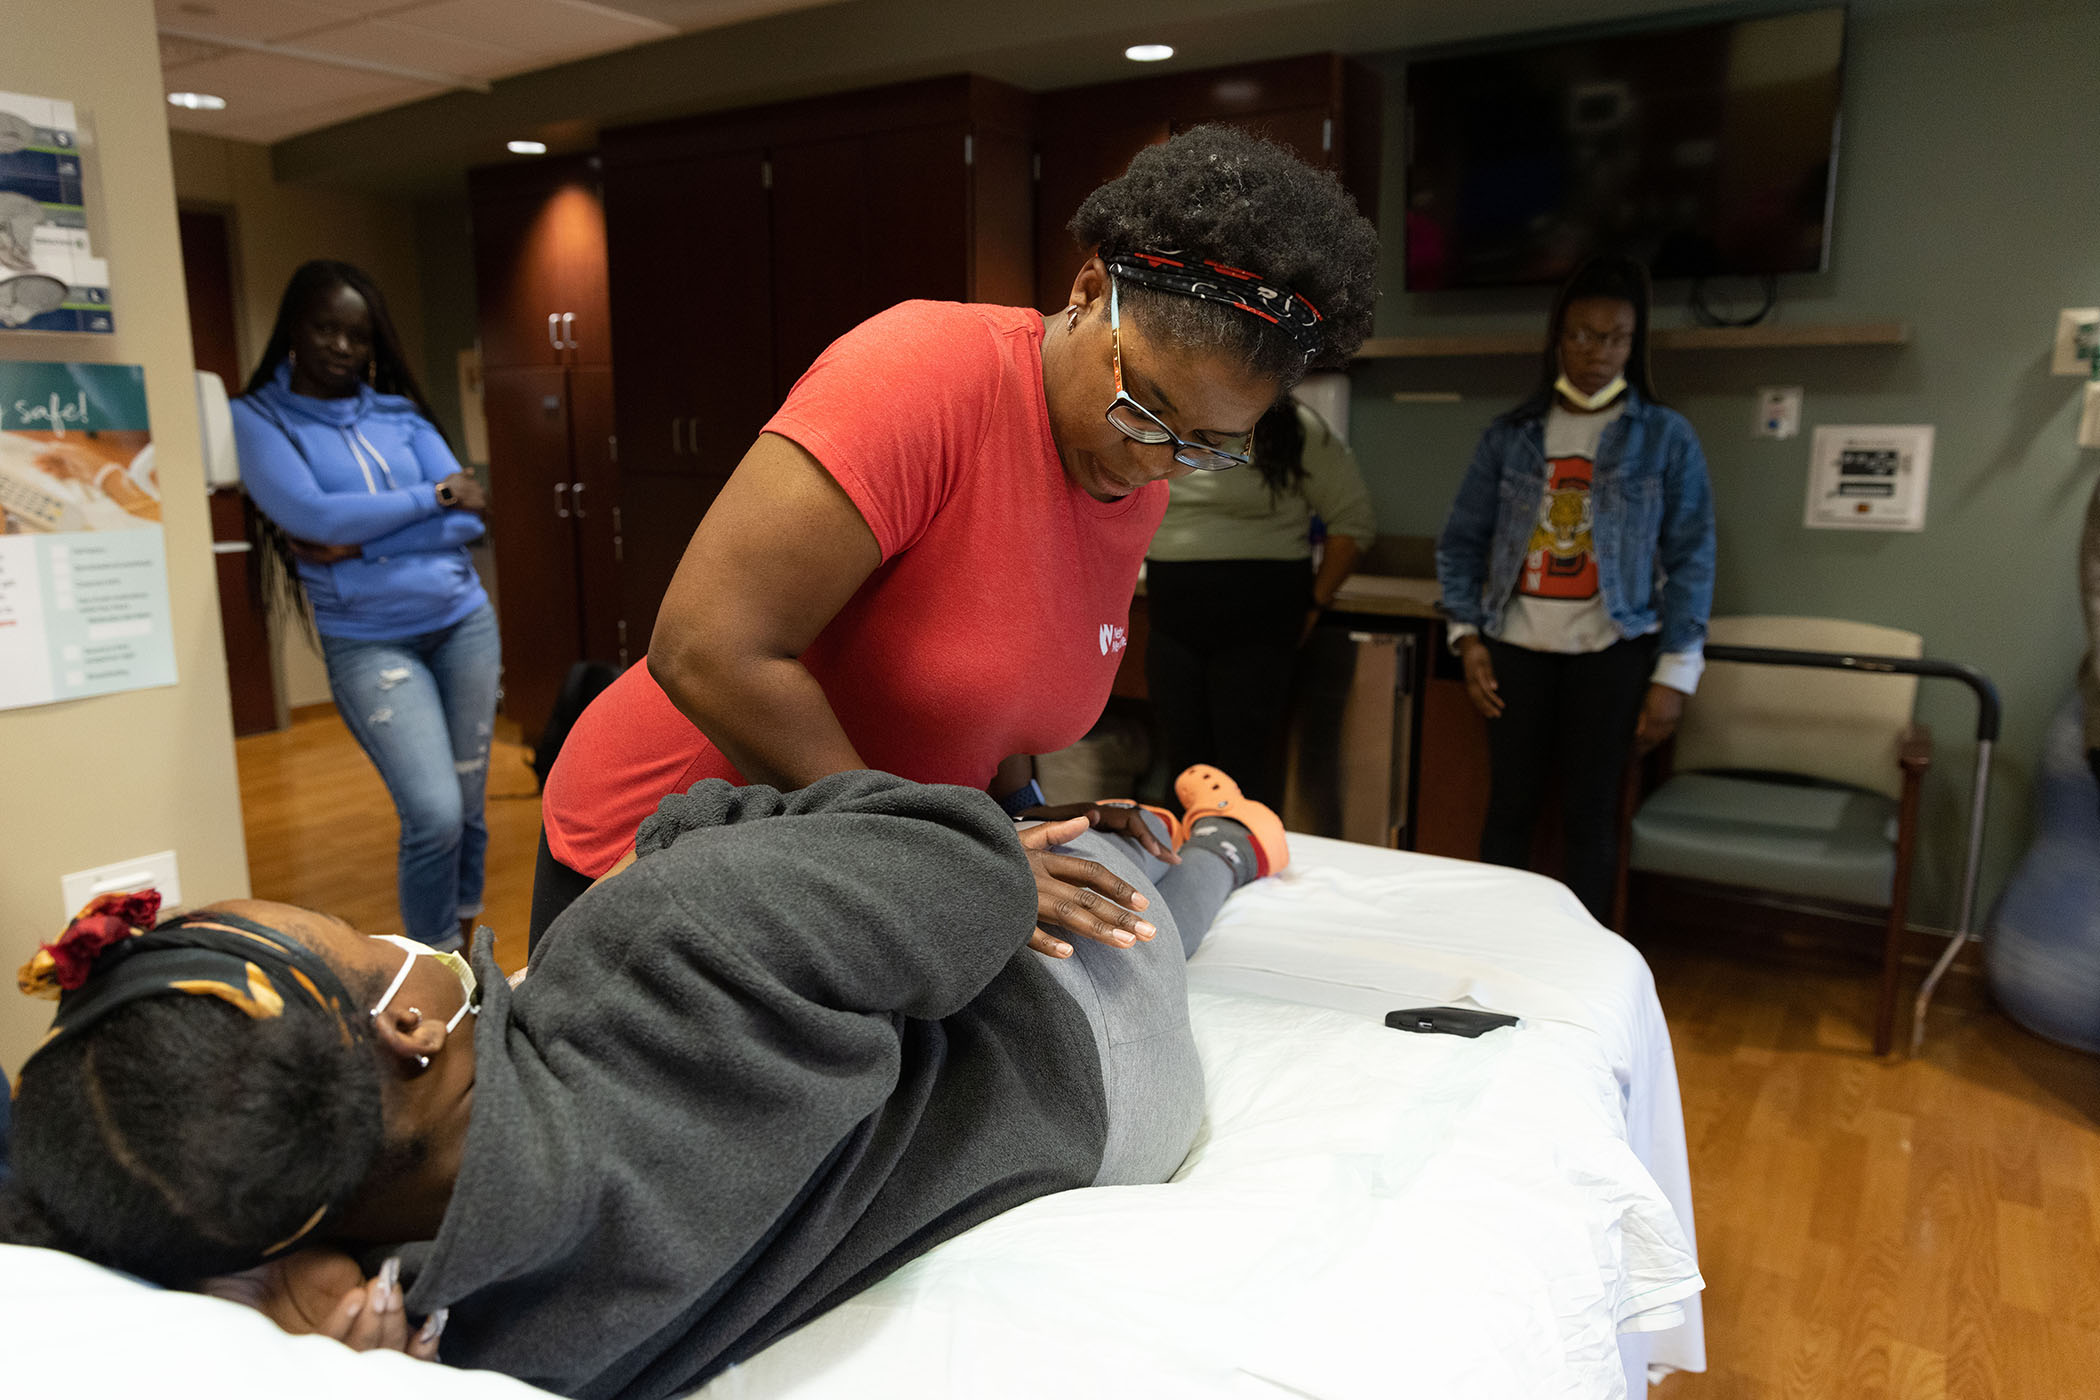 While doulas-in-training toured the labor and delivery unit&comma; Jessica McGhee demonstrates an exercise doulas can perform to relieve labor pains&period;